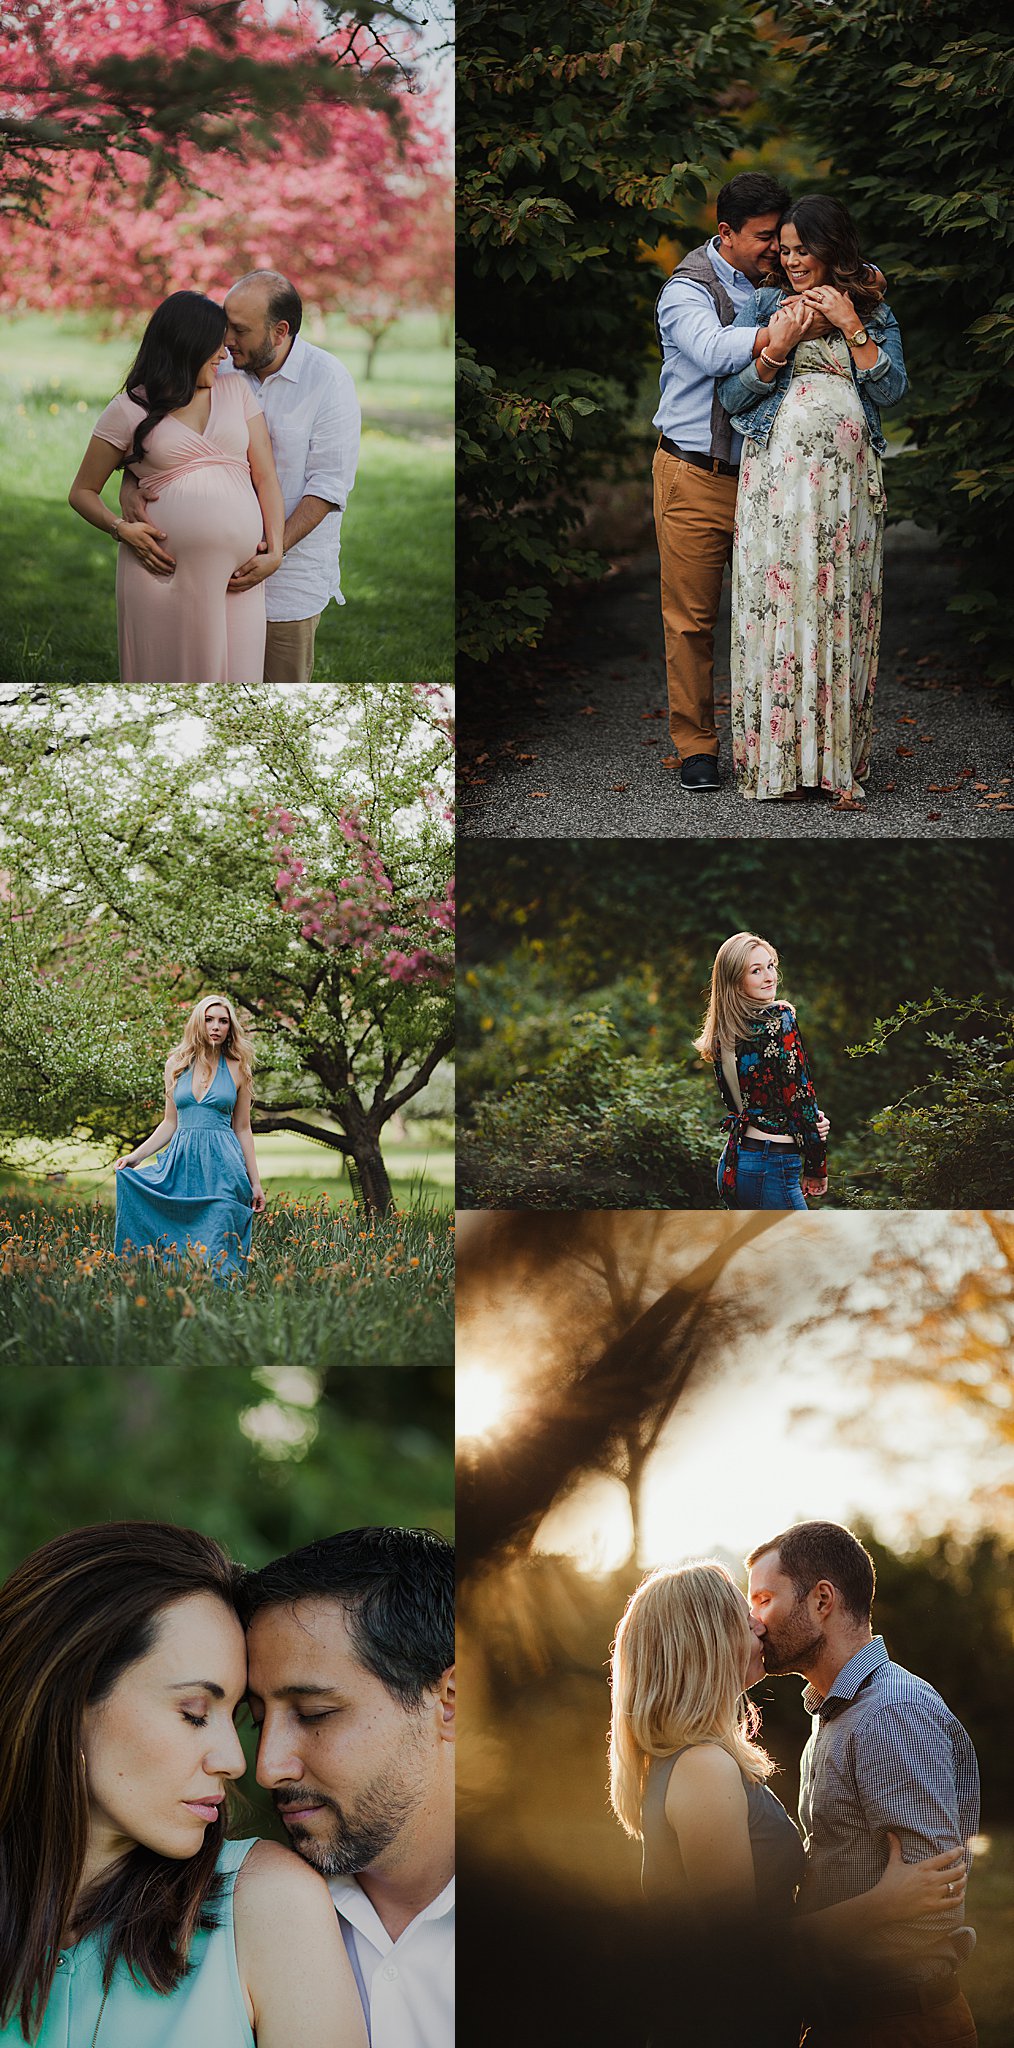 Outdoor Sessions at Cylburn Arboretum in Baltimore Maryland by Maria Ortiz Photography